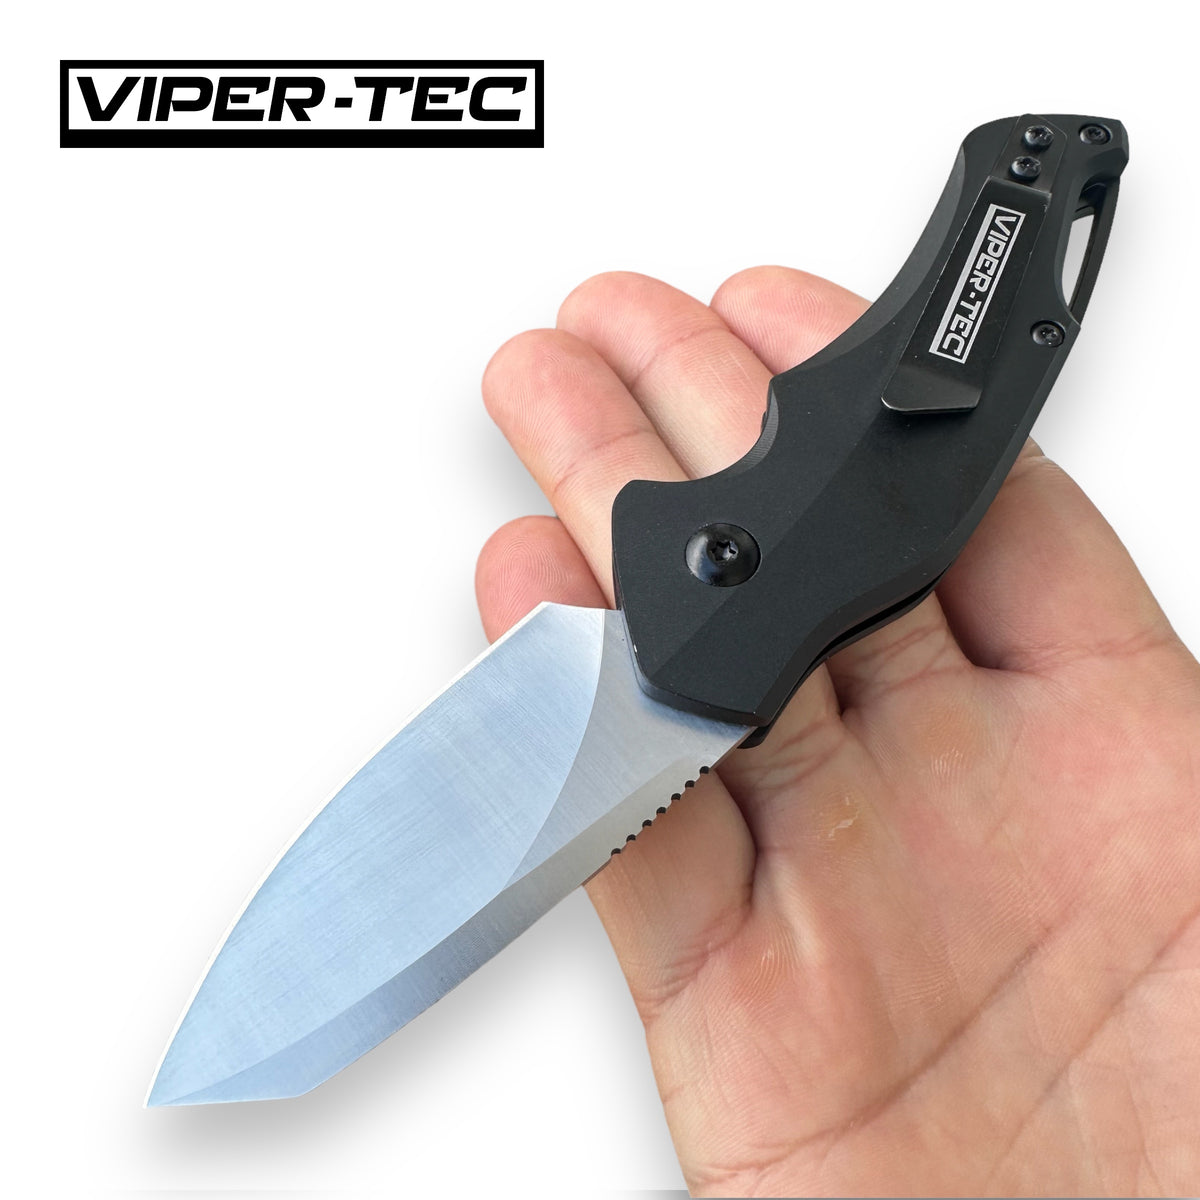 Viper Tec Grunt Switchblade knife in hand